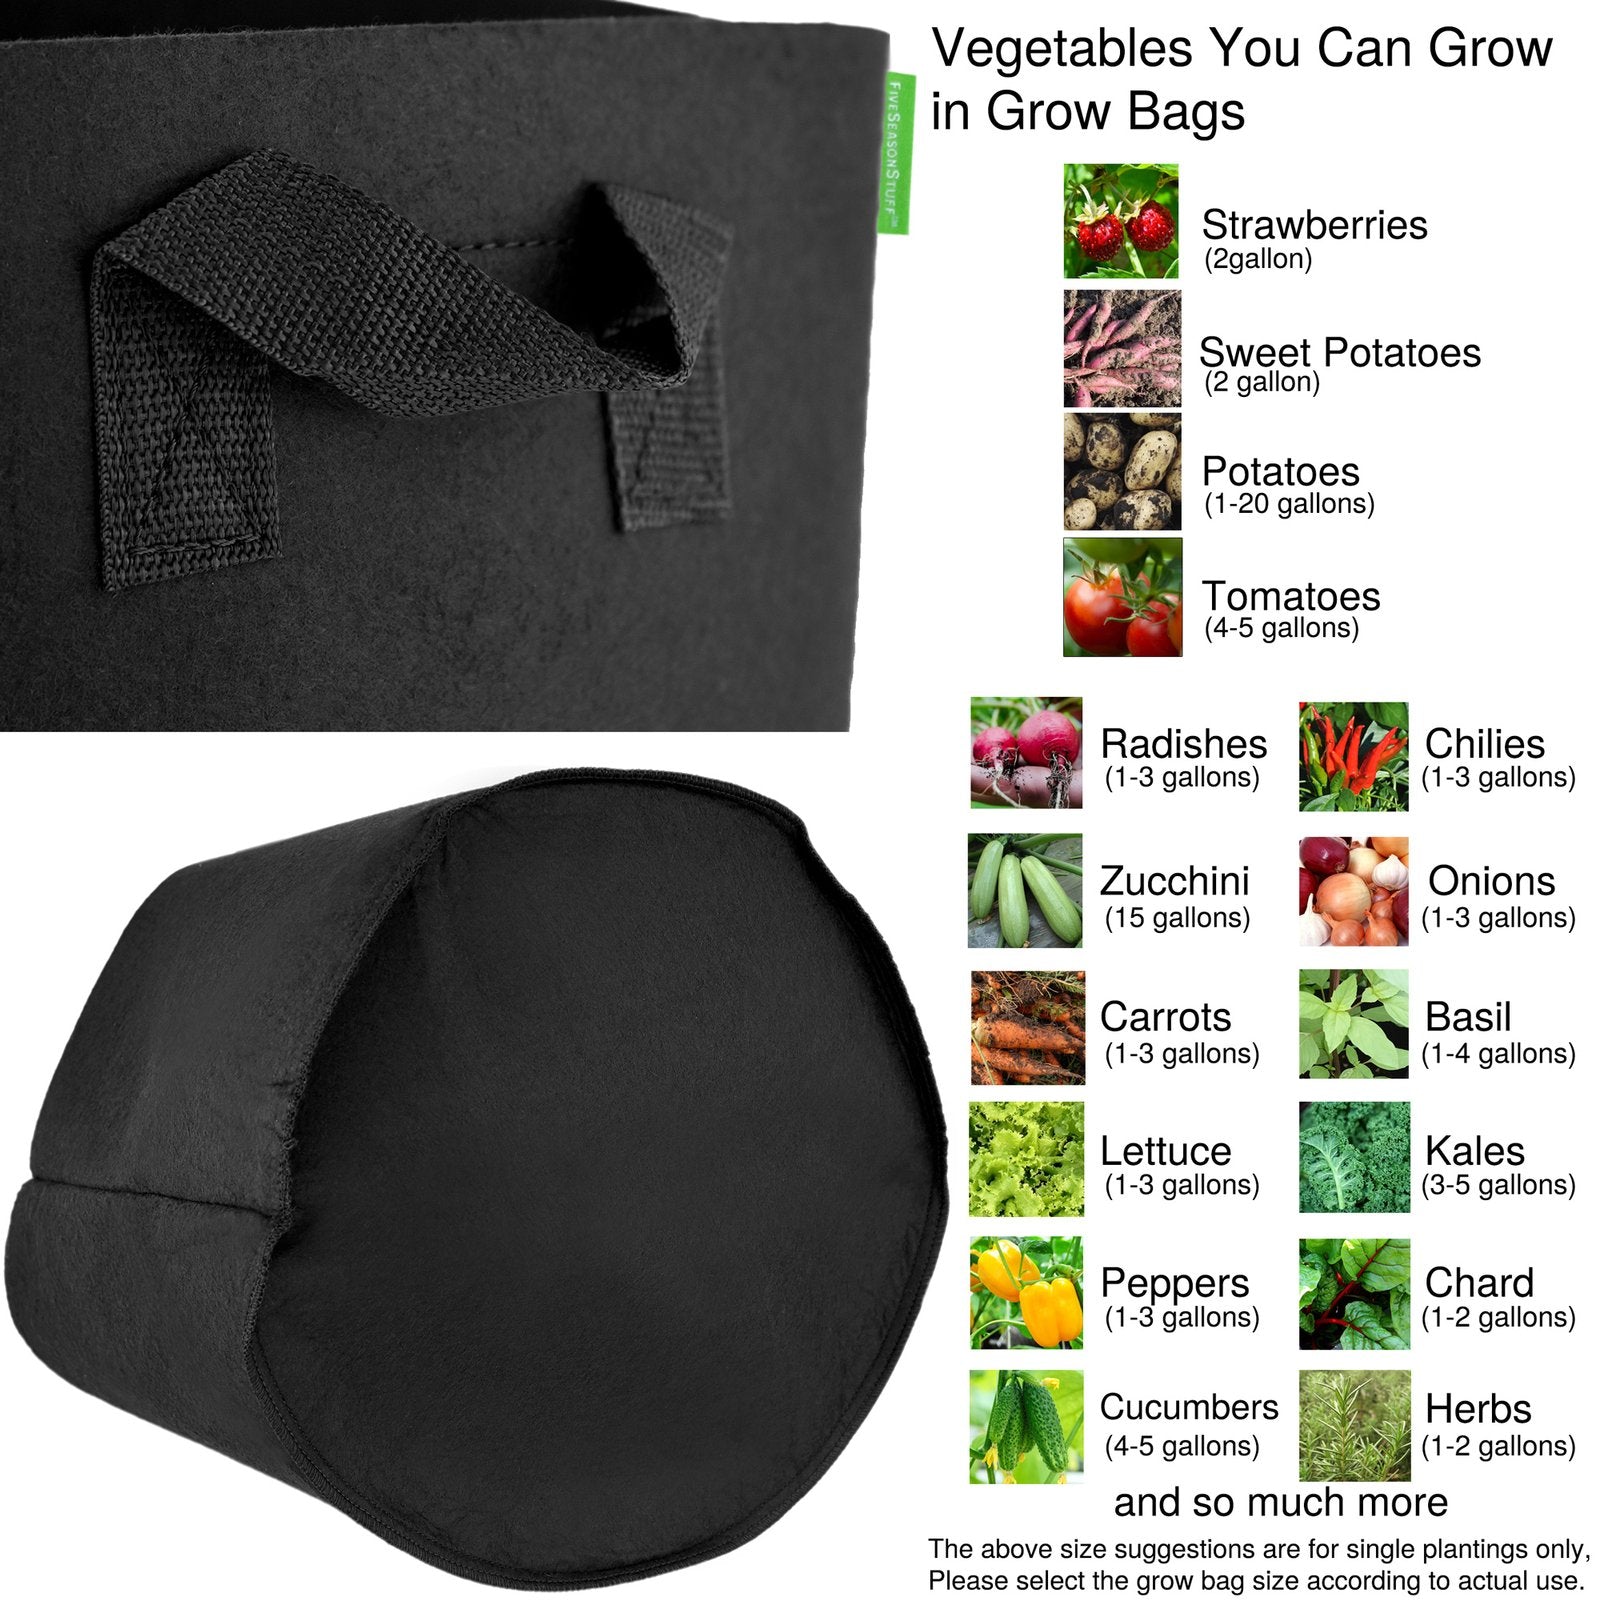 8 Pack 10 Gallons Grow Bags - Breathable Fabric Pots for Healthier Plants Vegetables Flowers – Heavy Duty Thick Containers with Sturdy Handles - Aeration Planters for Smart Gardening (Black)